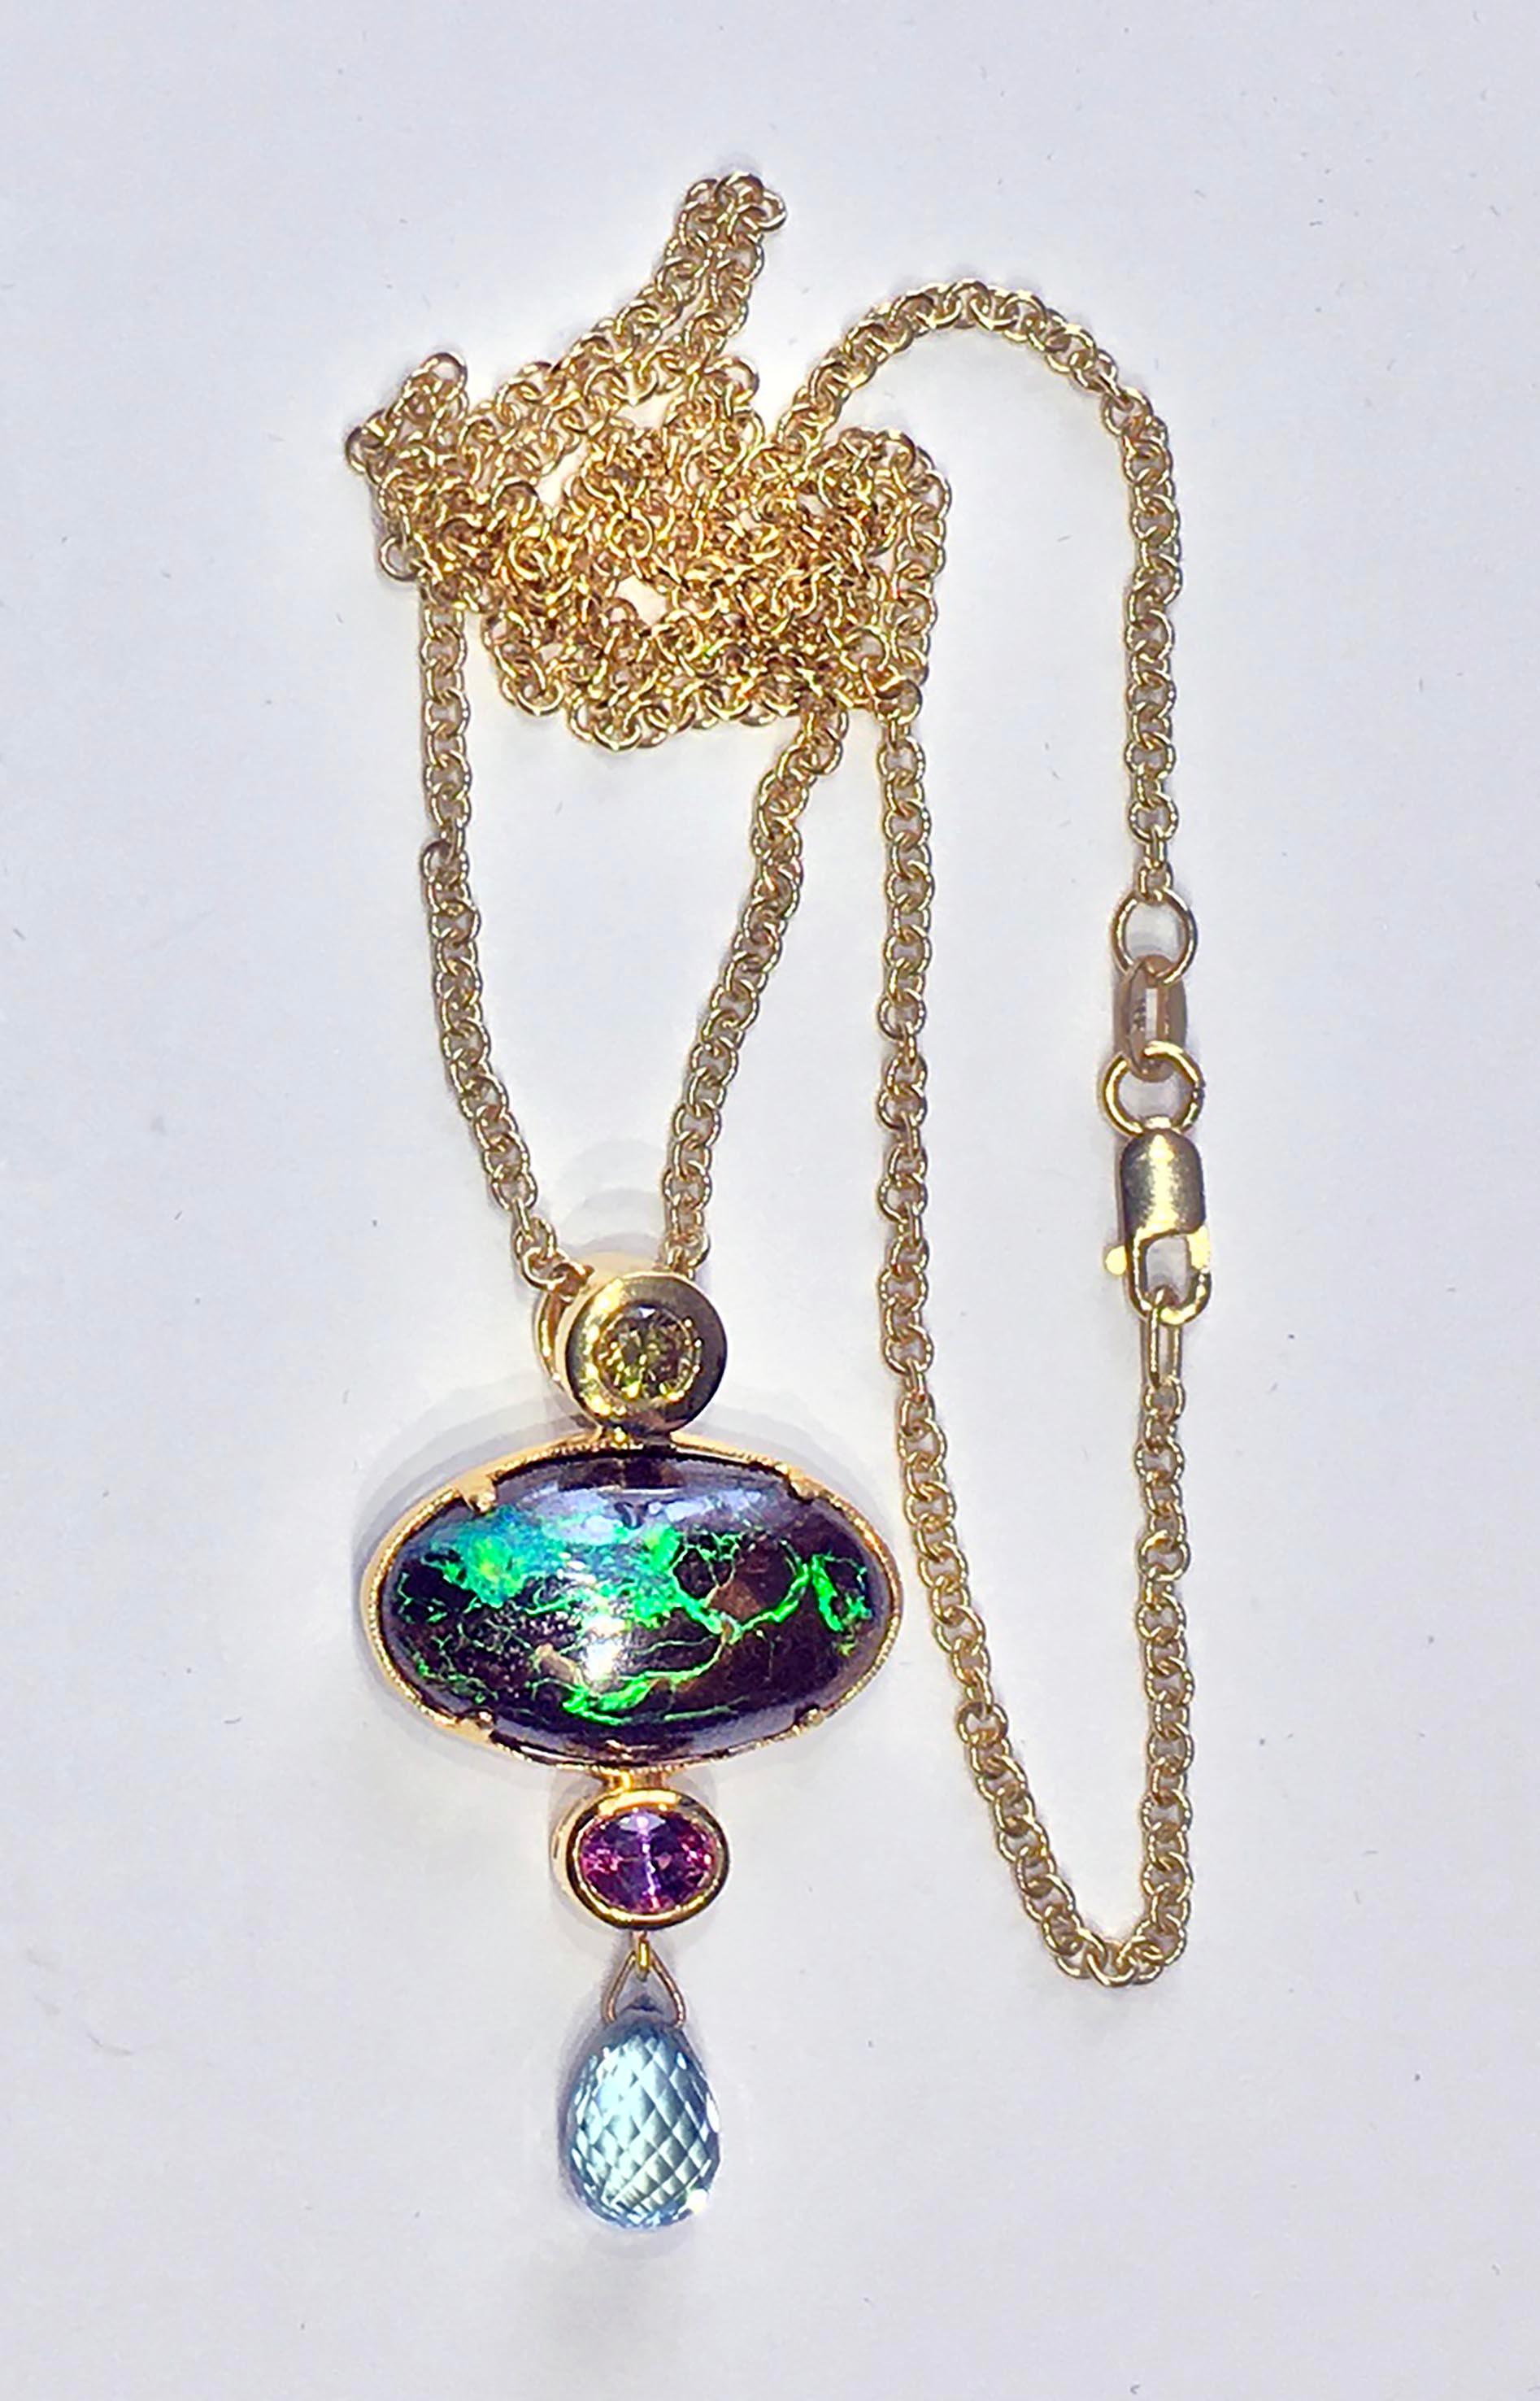 18kt Gold Pendant set with a Yellow Diamond, an Australian Boulder Opal, a Pink Oval Sapphire & a Teal Sapphire Briolette. This pendant is hung on an 18 inch 18kt Gold link chain with a Lobster Claw Clasp. the Fancy Yellow Diamond is 0.17 Carats,